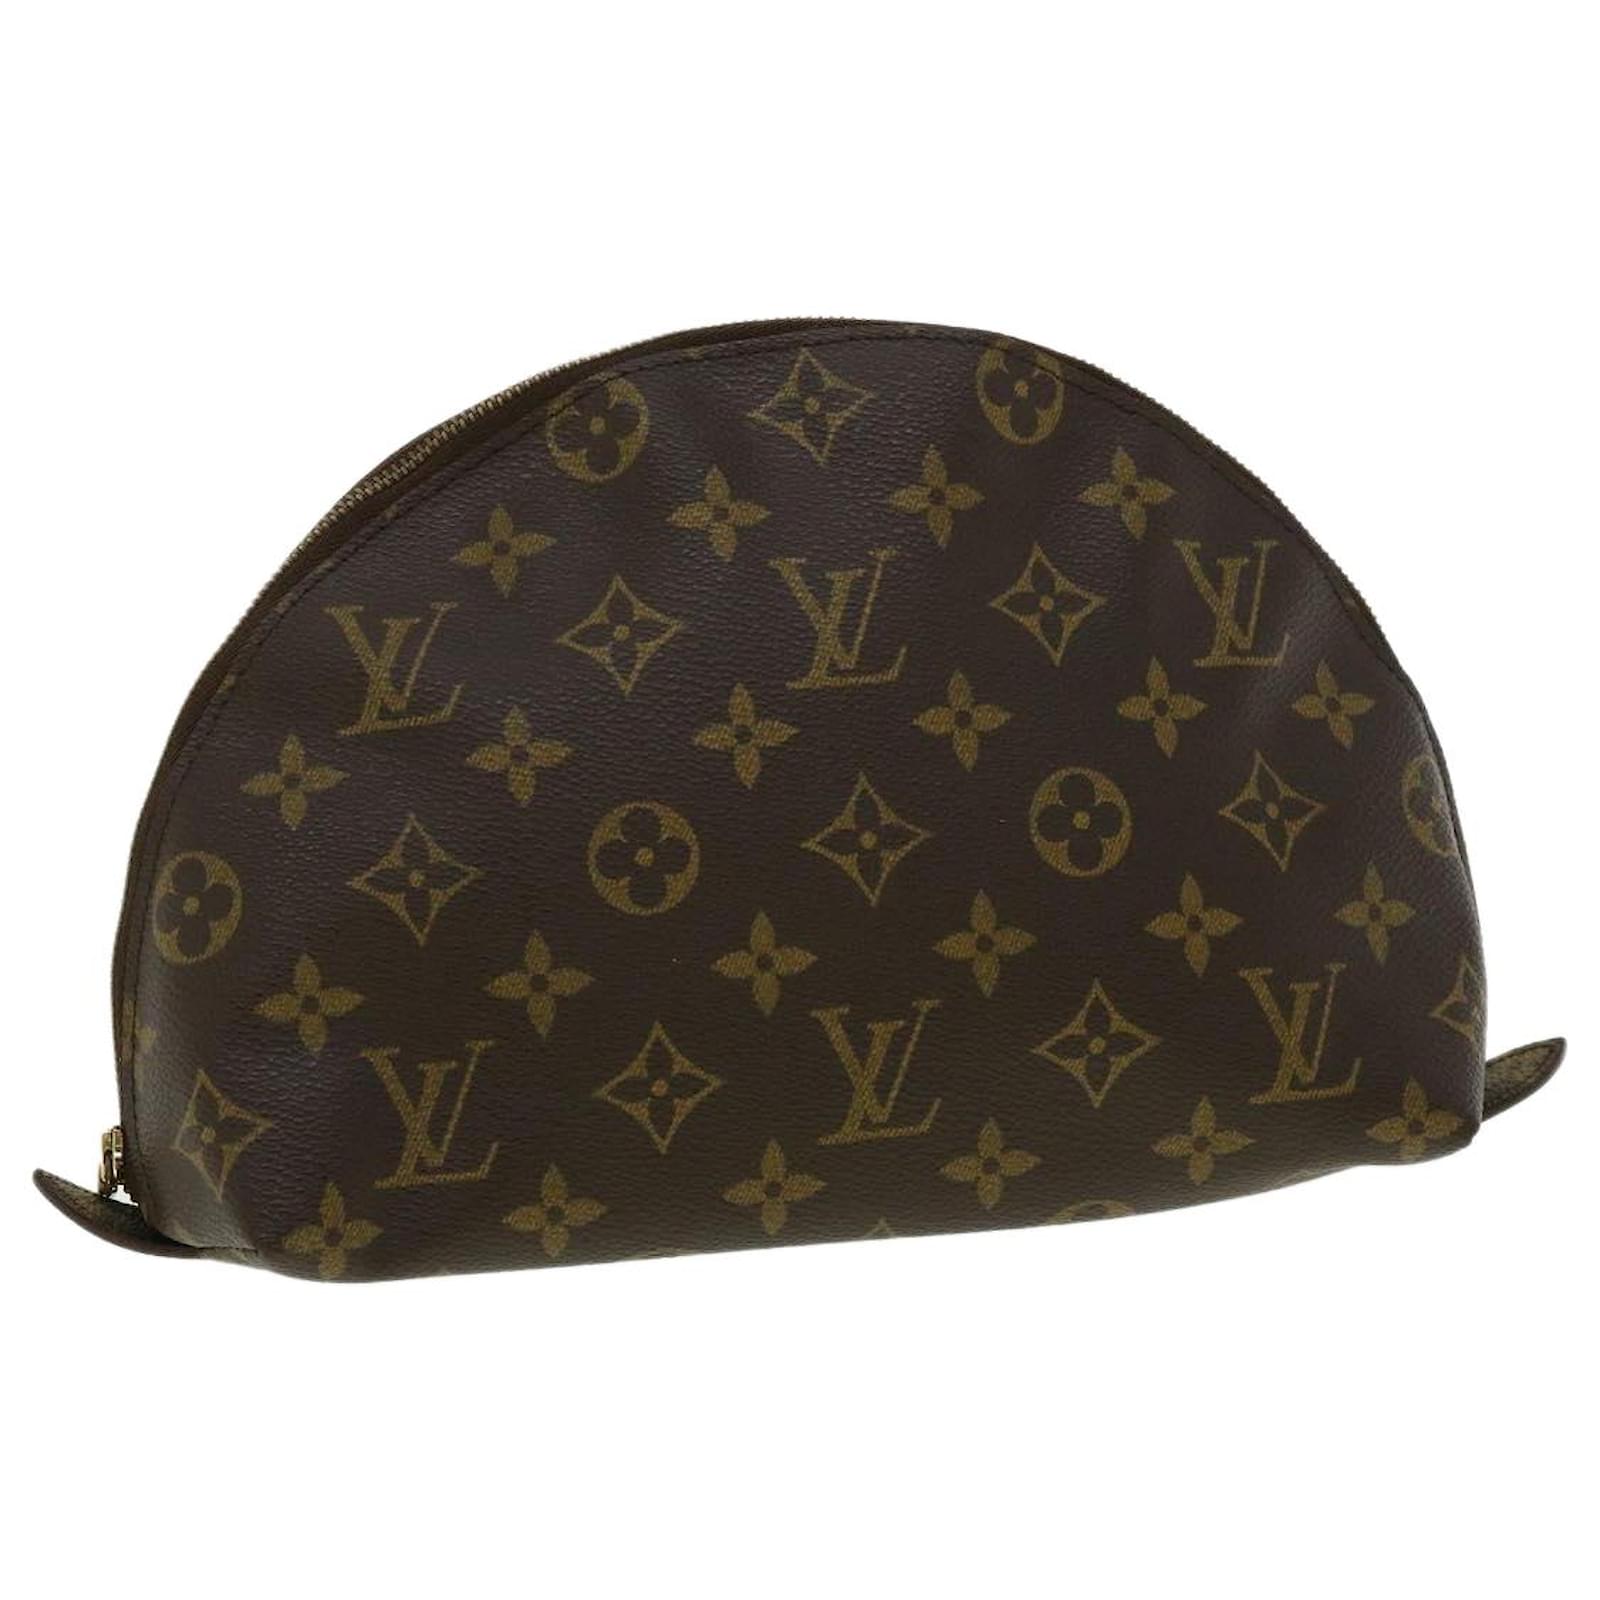 louis vuitton cosmetic bag for purse